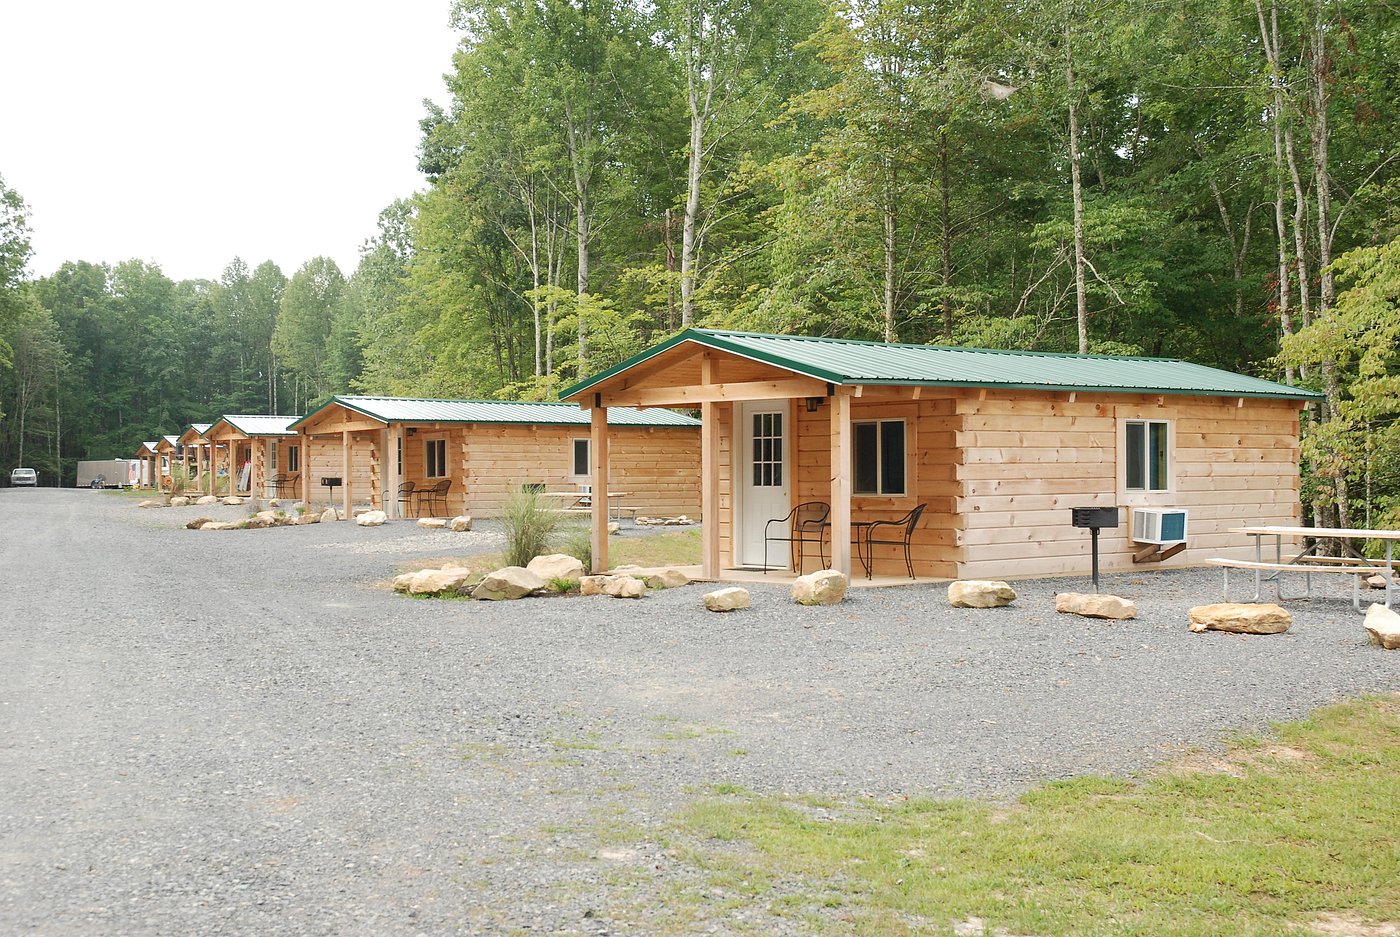 Mountain Lake Campground and Cabins Mini Golf: Pictures & Reviews ...